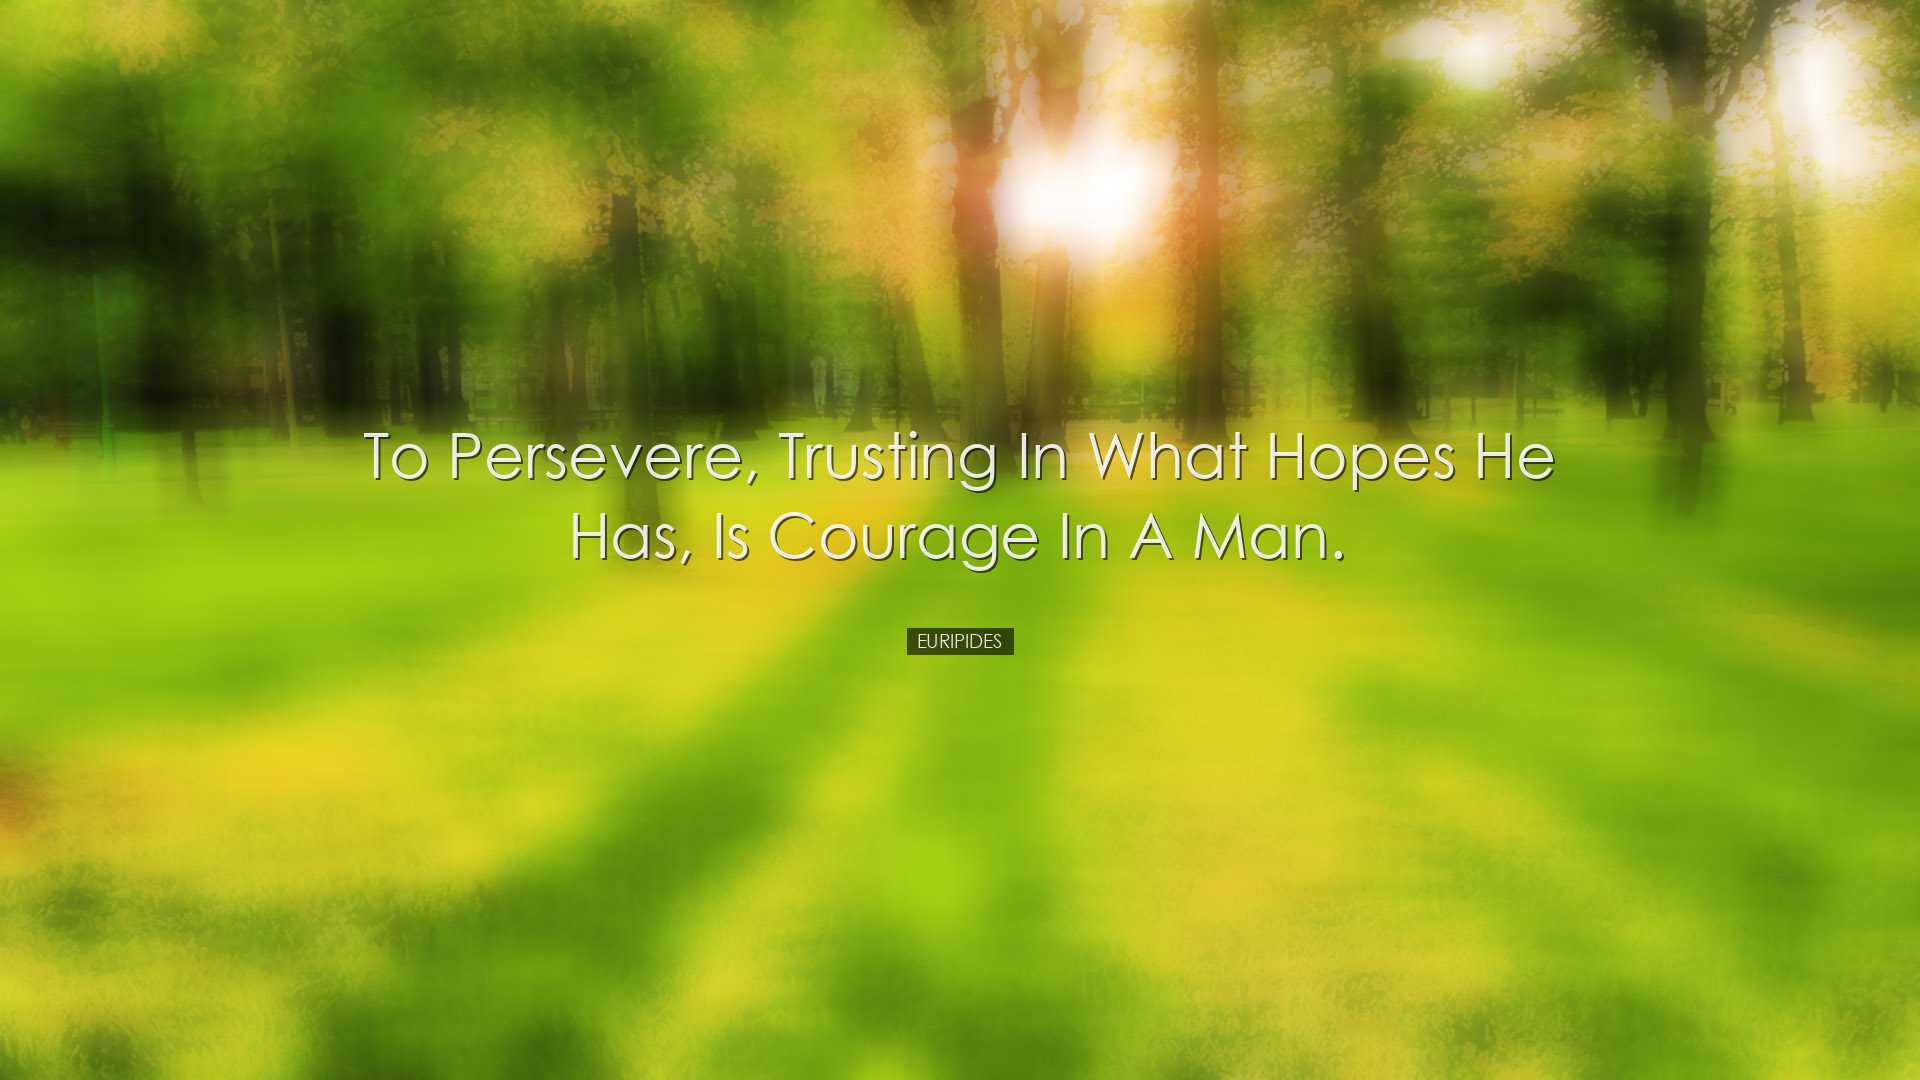 To persevere, trusting in what hopes he has, is courage in a man.